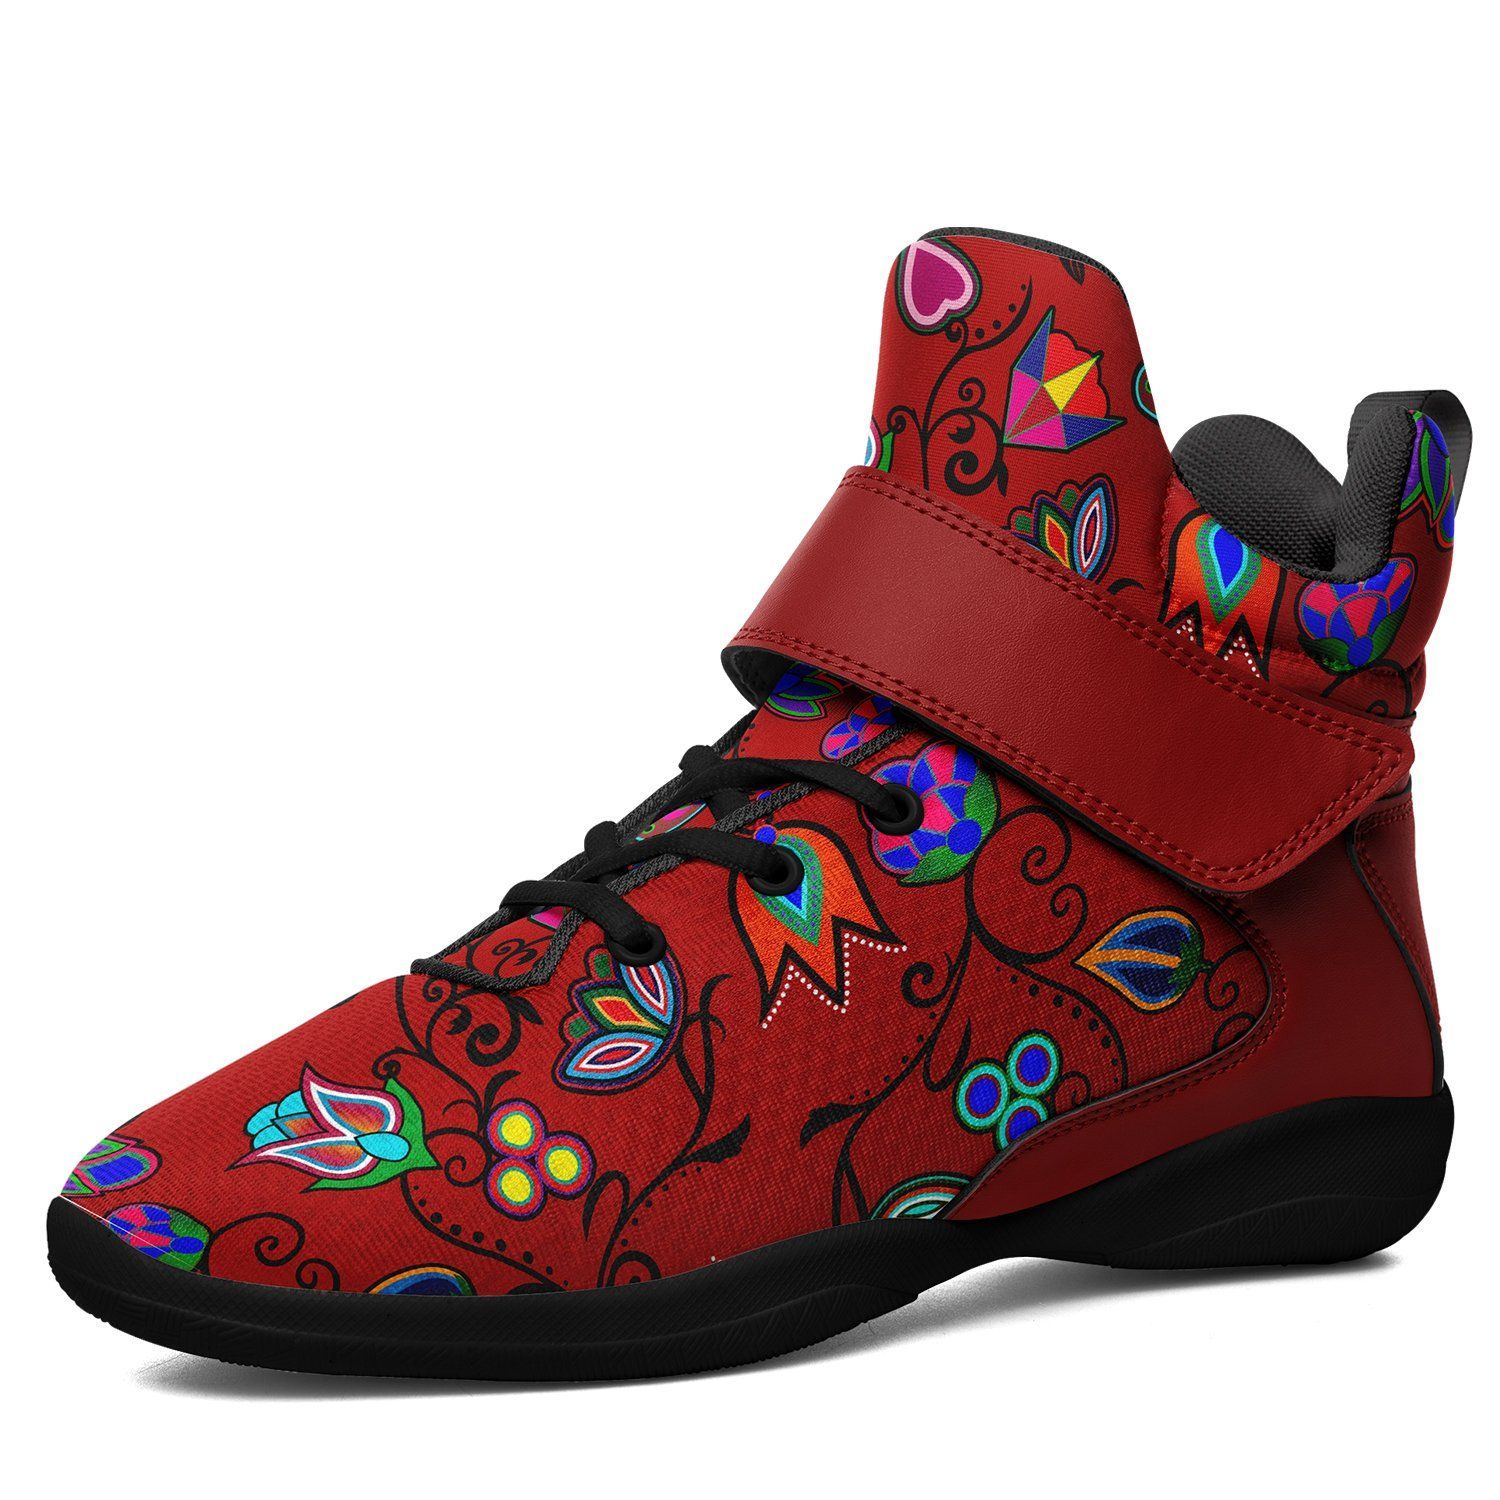 Indigenous Paisley Dahlia Kid's Ipottaa Basketball / Sport High Top Shoes 49 Dzine US Child 12.5 / EUR 30 Black Sole with Dark Red Strap 